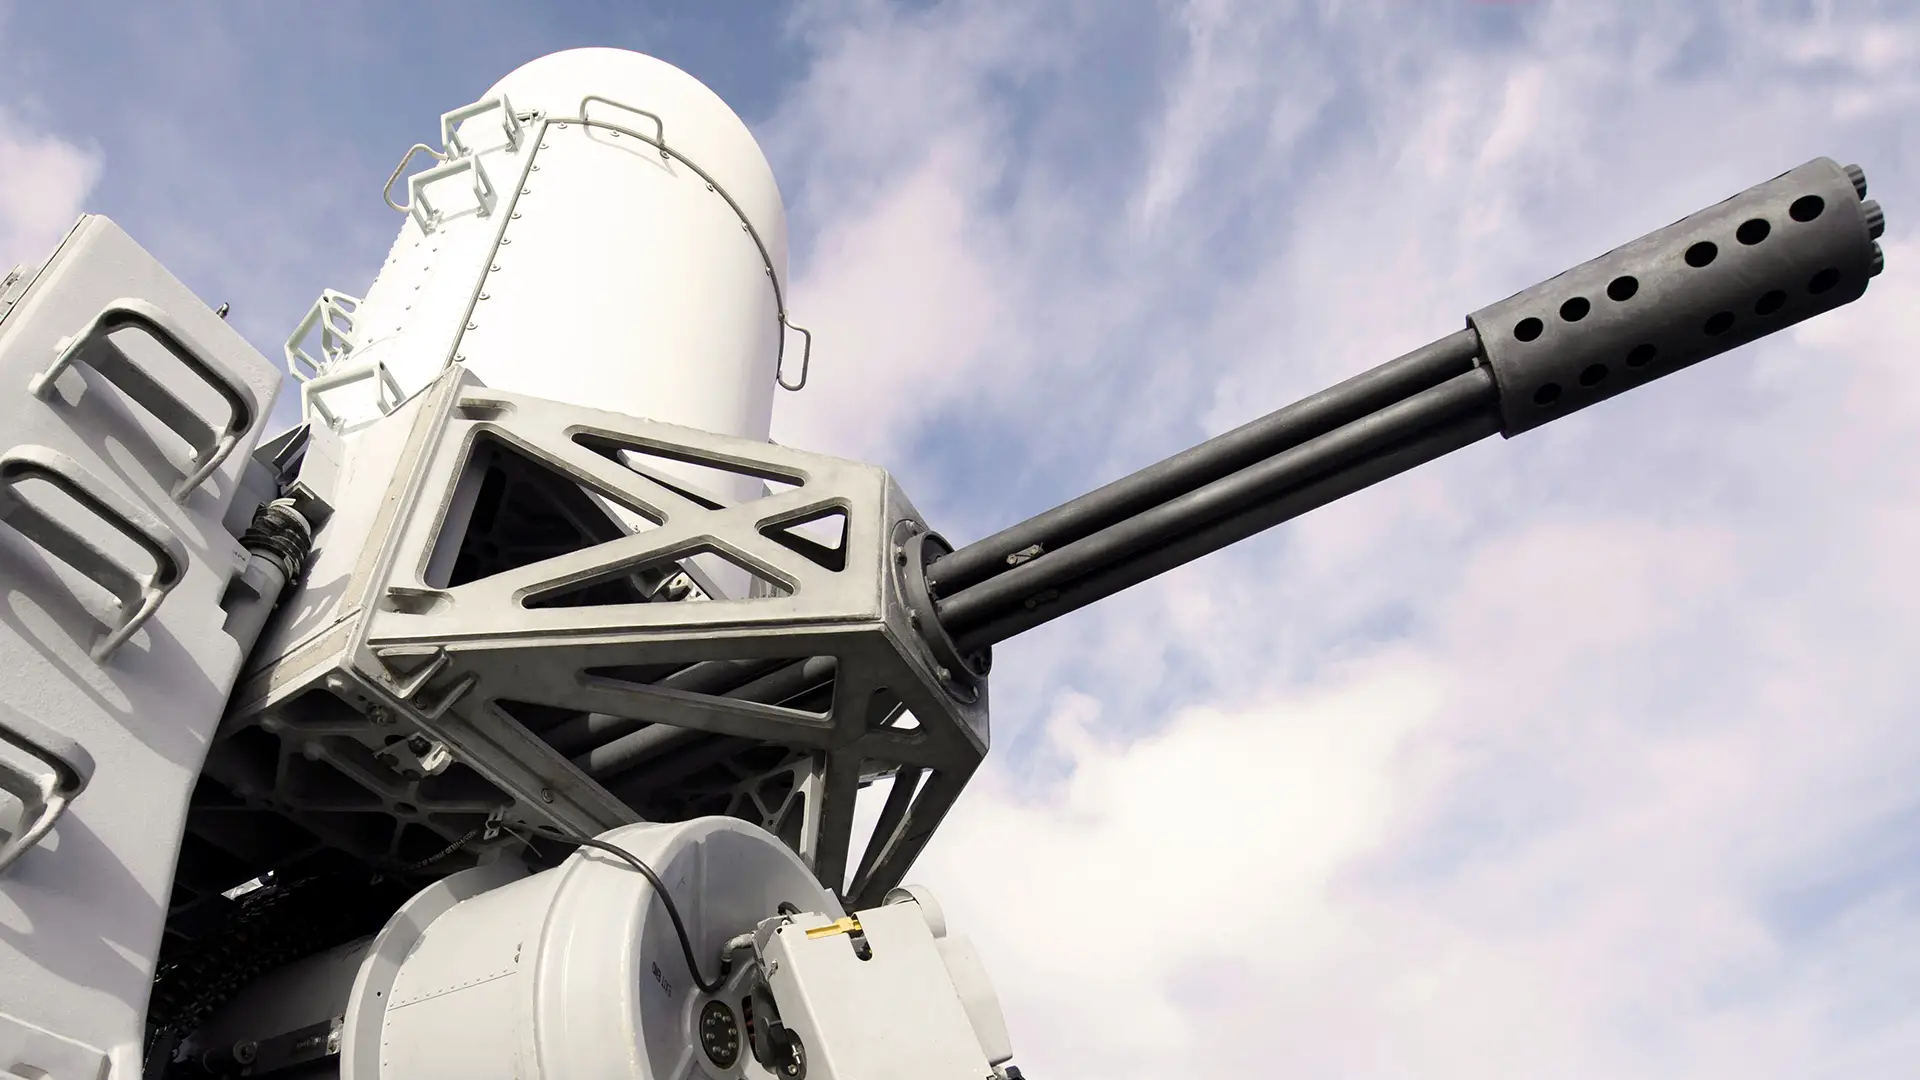 A Japanese engineer in his garage has created a counterpart to the Mk 15 Phalanx CIWS anti-aircraft system, which fires bullets for a game of strikeball